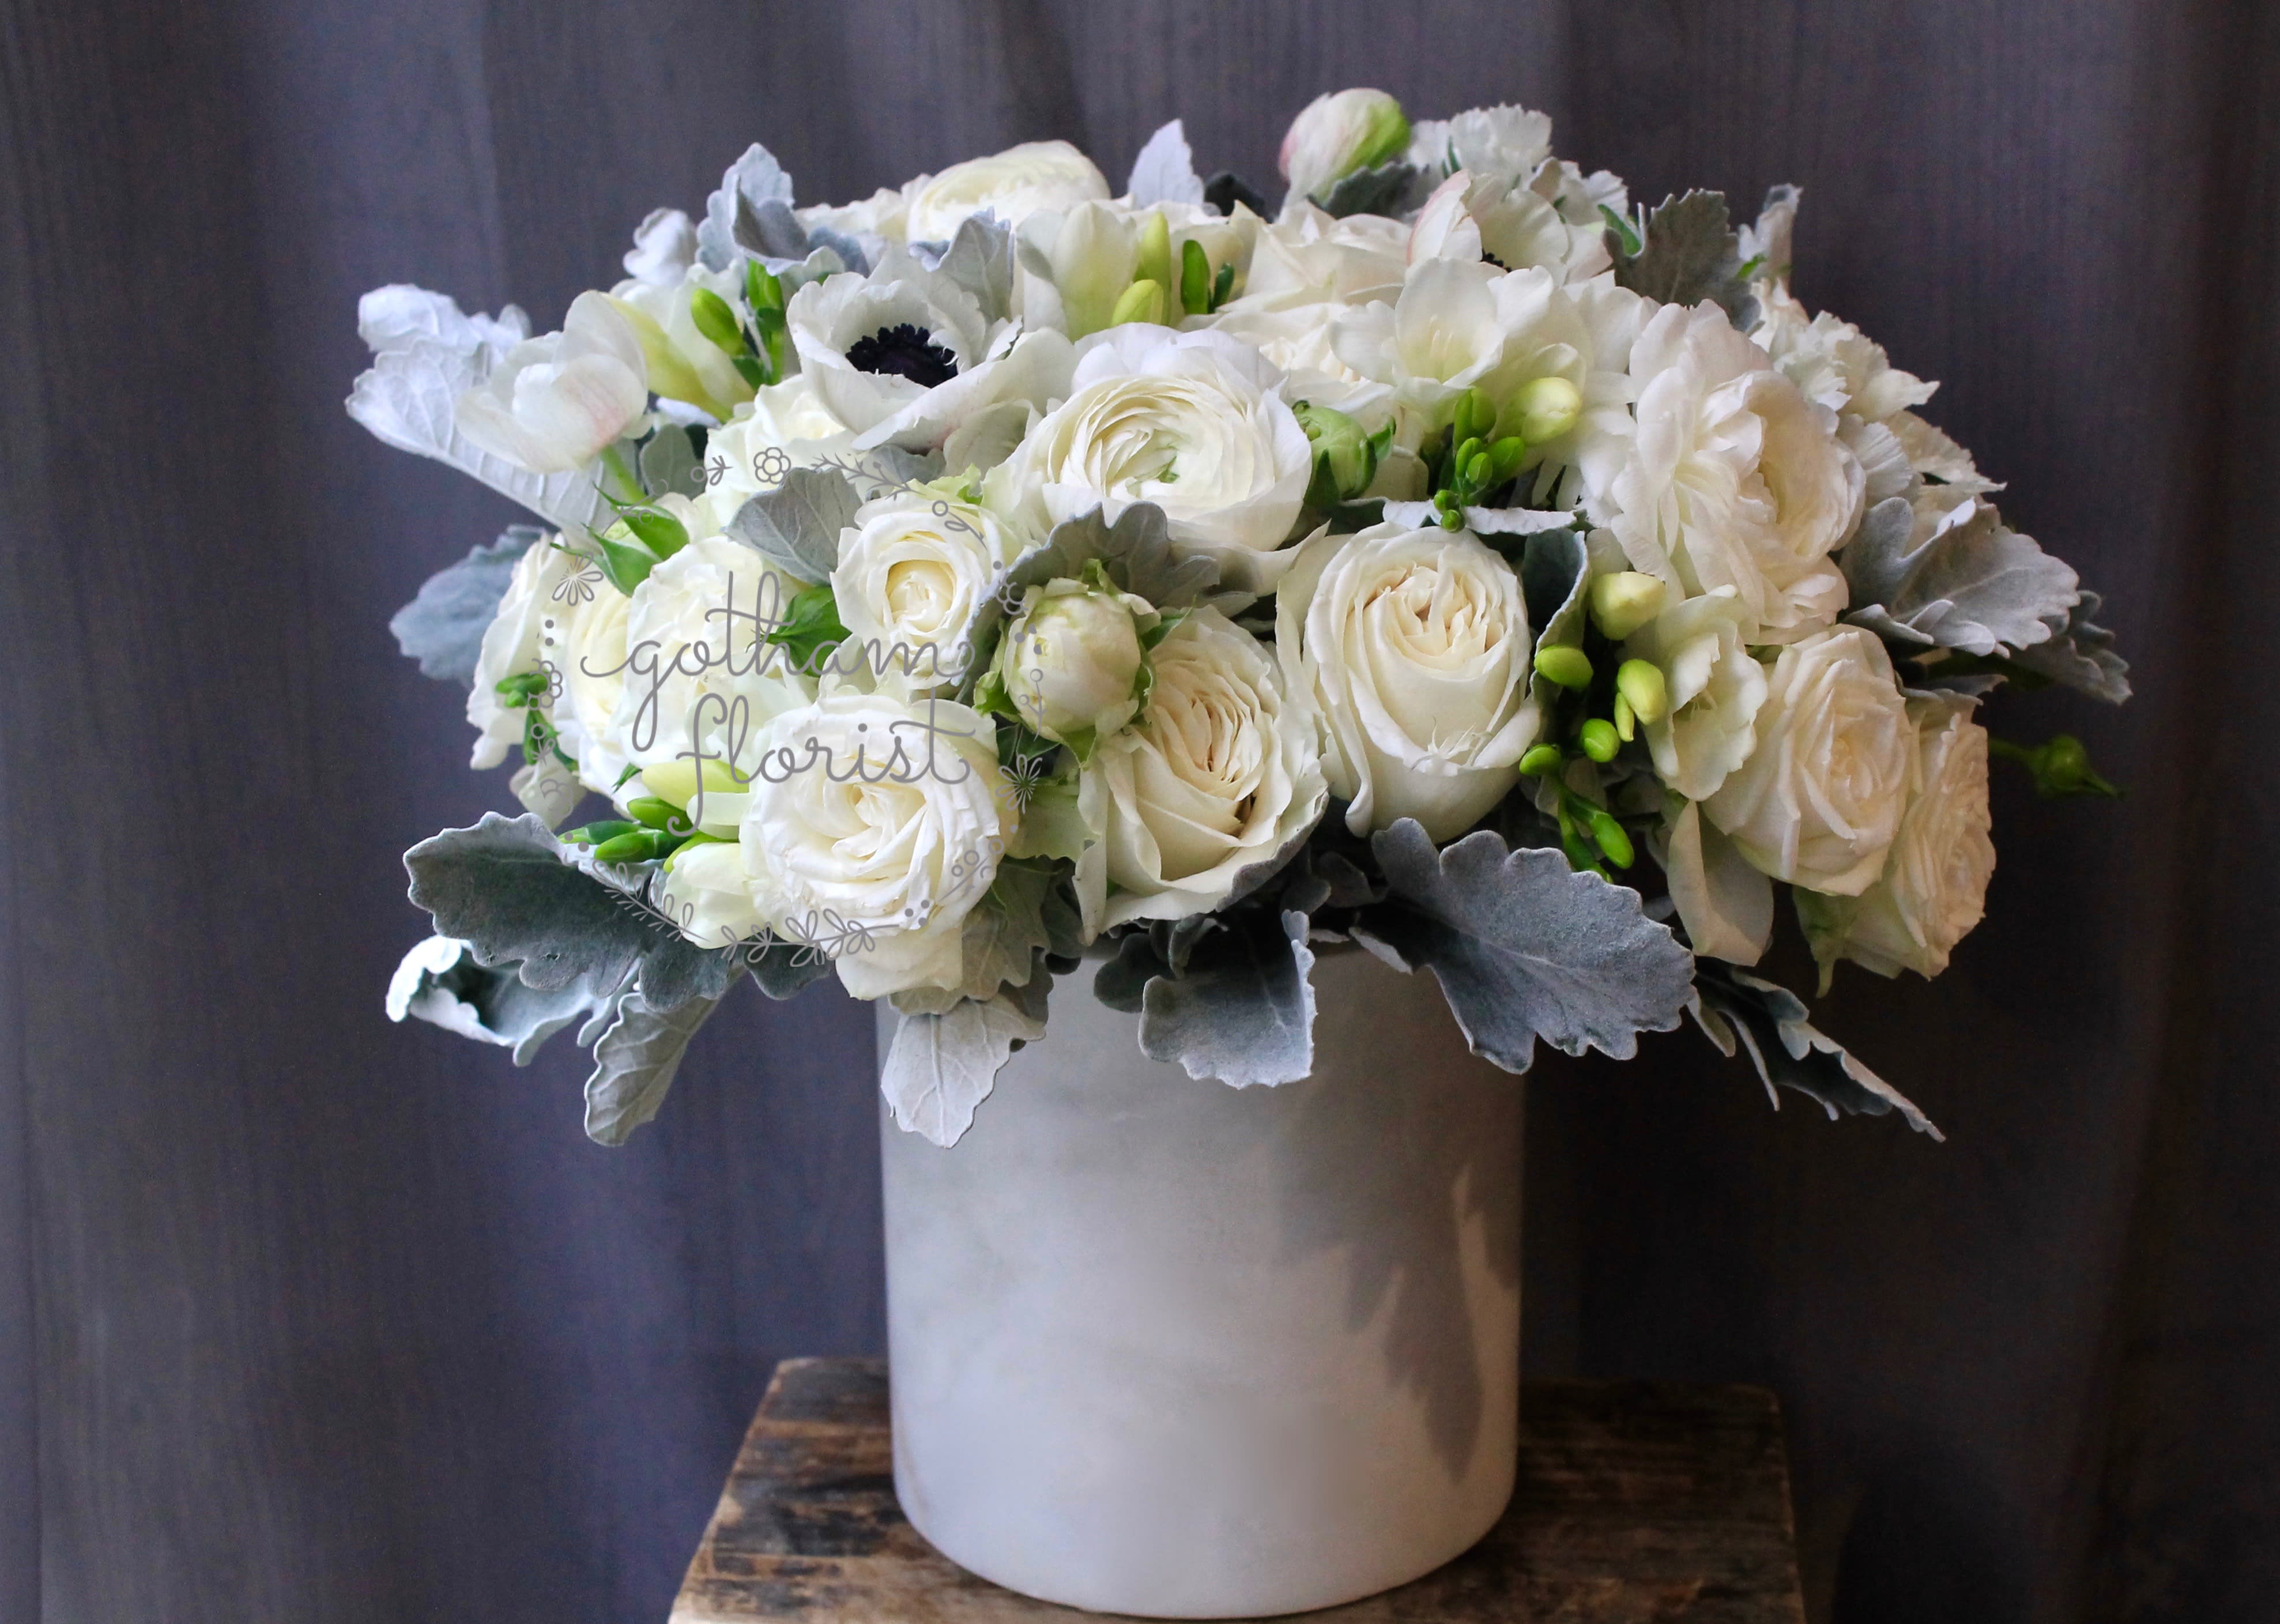 Purity - Gorgeous white luxurious blooms like ranunculus, roses, anemone and freesia in white glass vase. A perfect gift to send to congratulate and celebrate. Also a classic design for sympathy. #nycflorist #bestfloristny #nyc #luxuryflorist #nycflowershop Send the best flowers from the best flower shop in New York. We offer same day flower delivery in Manhattan, Queens, Bronx, Brooklyn, Staten Island and West Chester counties. We have the prettiest and most luxurious flowers to choose from and our designs are unique and whimsical. We carry Peonies almost every day of the year!! 